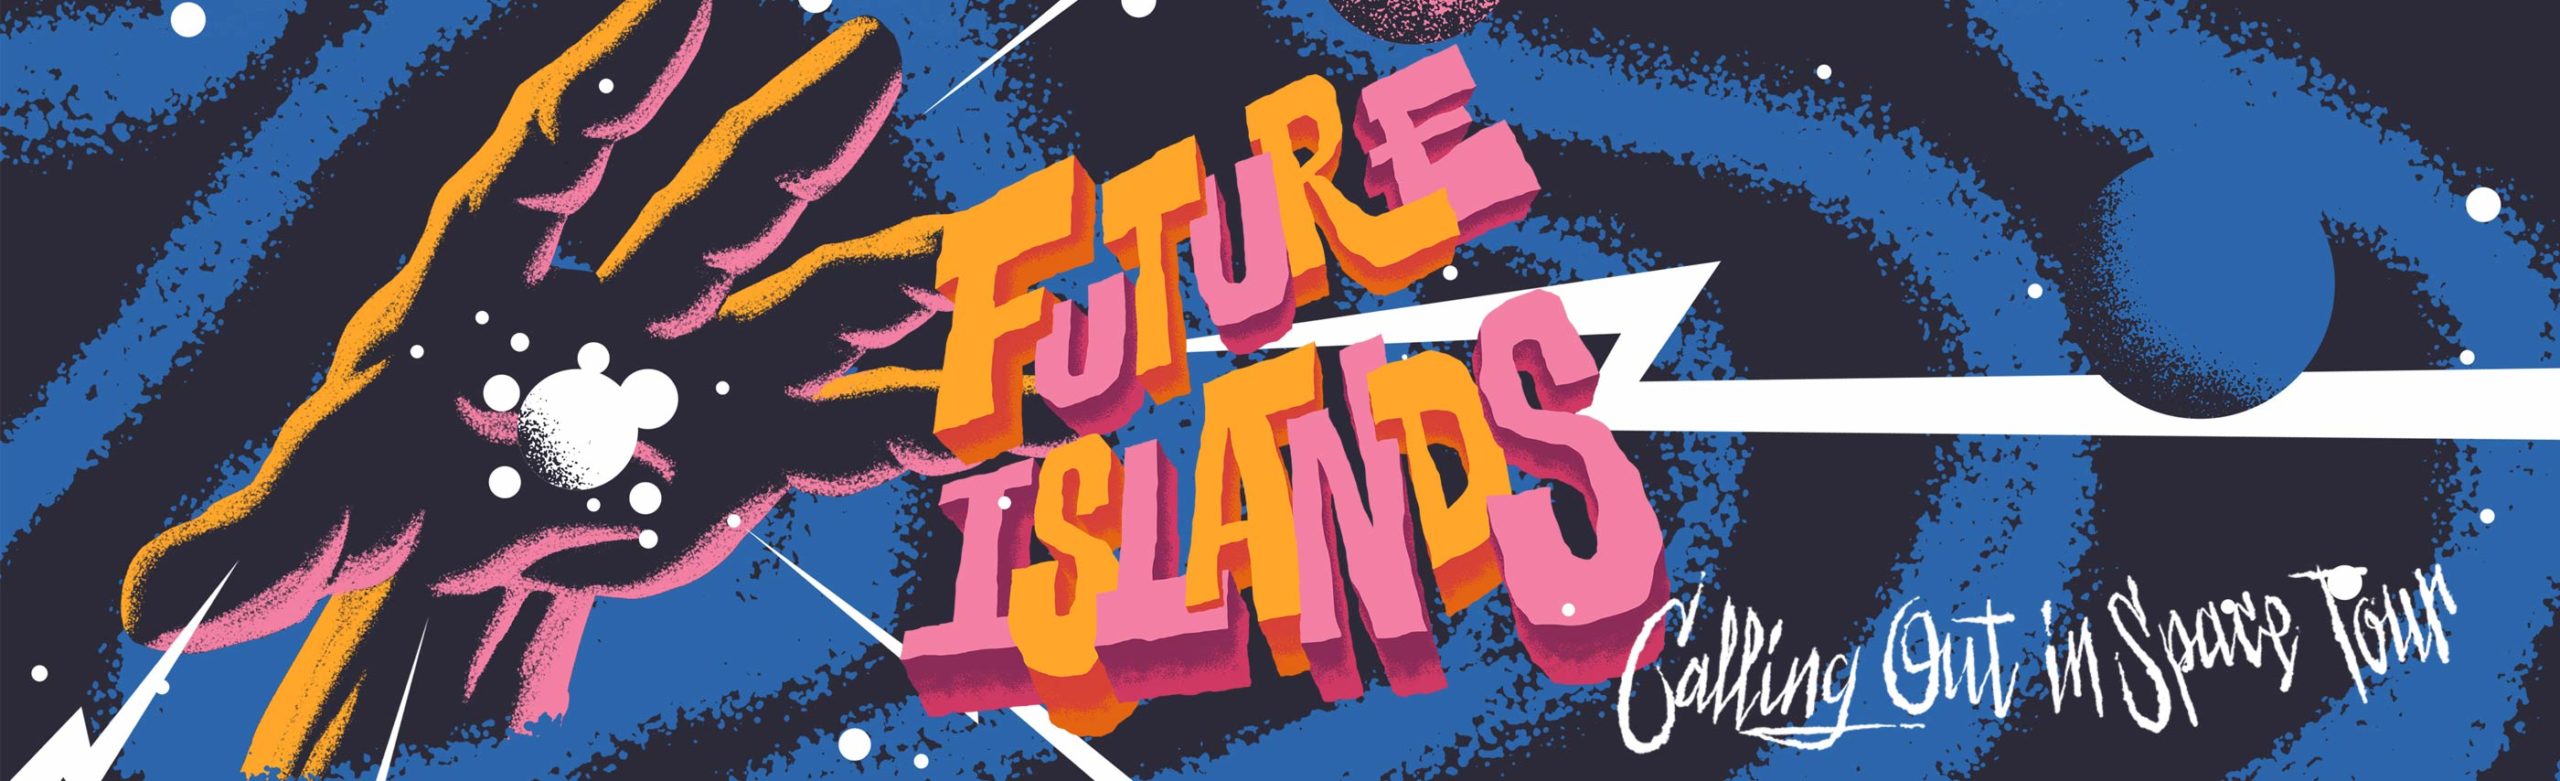 Event Info: Future Islands at The ELM 2021 Image